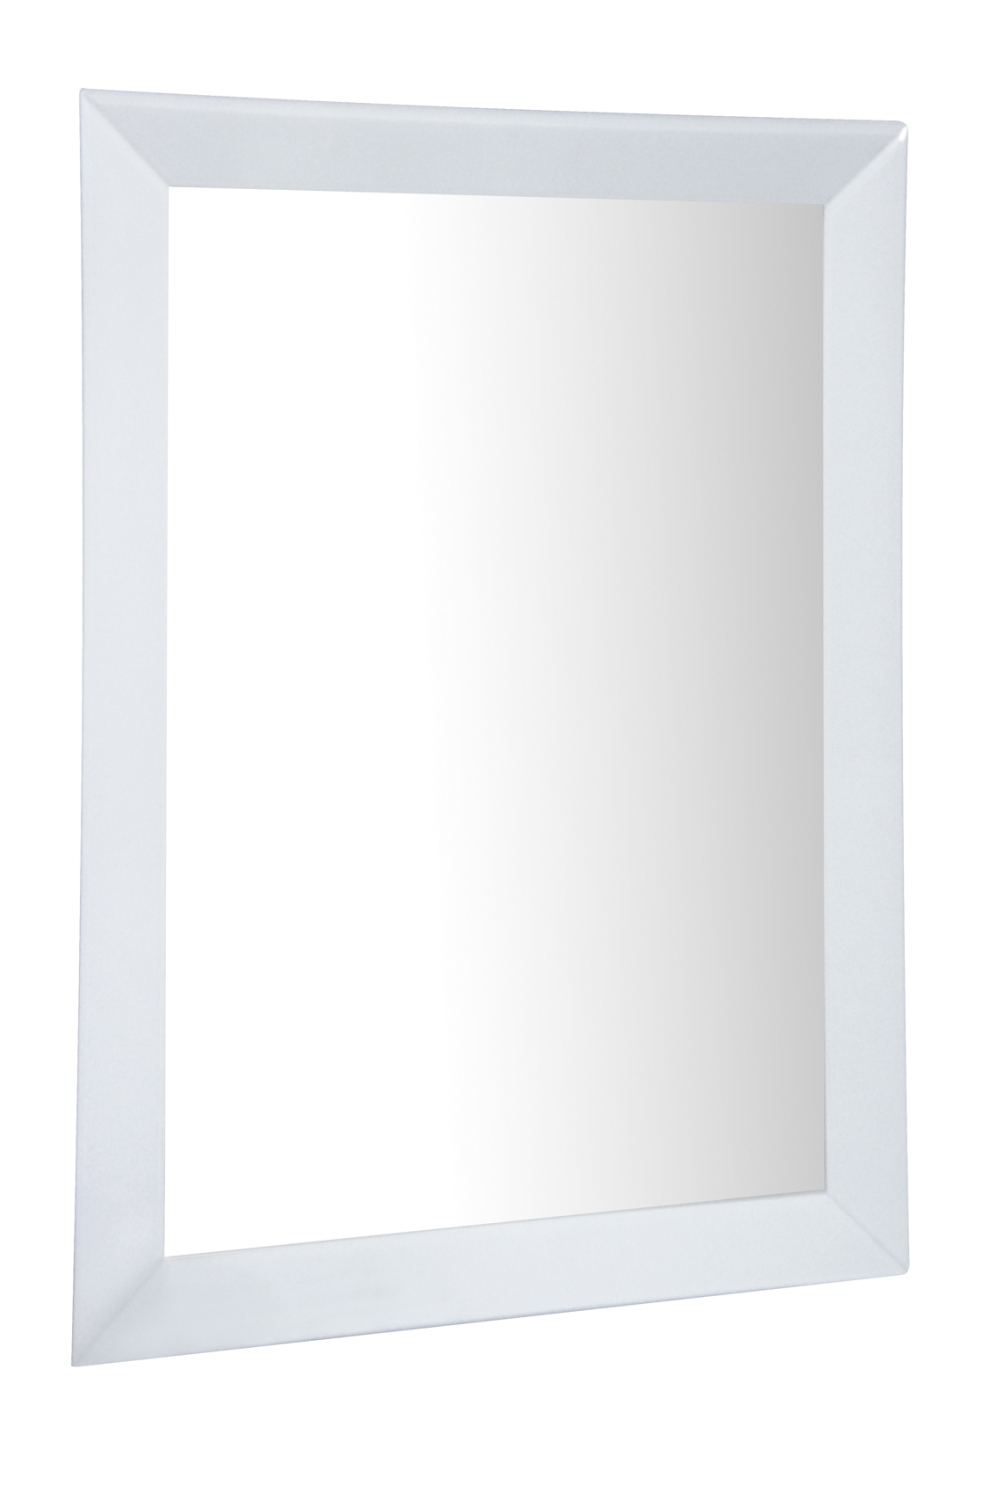 Mirrored White Bevelled Wall Mirror 